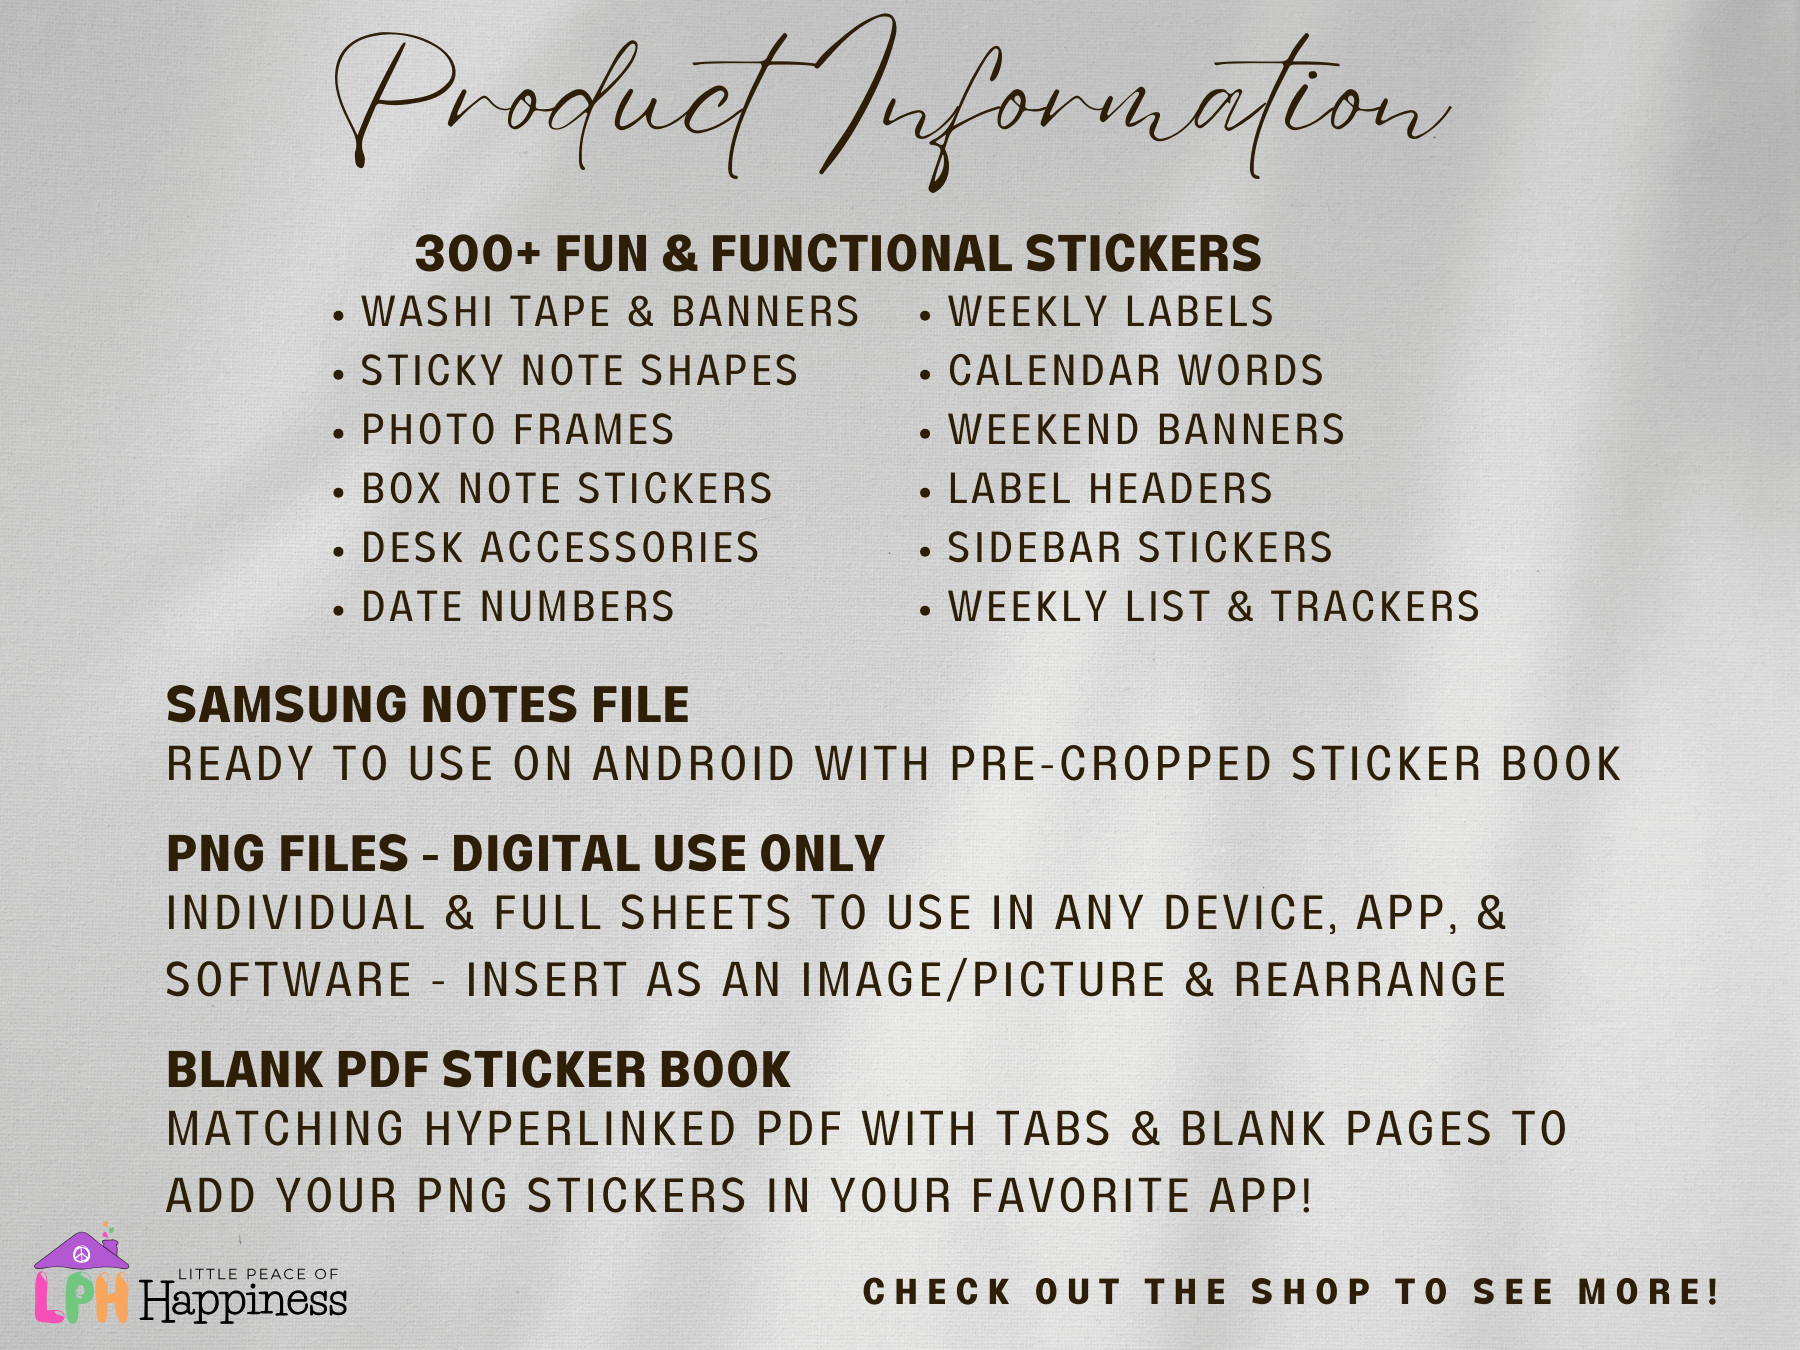 How to Use Functional Digital Sticker Pack